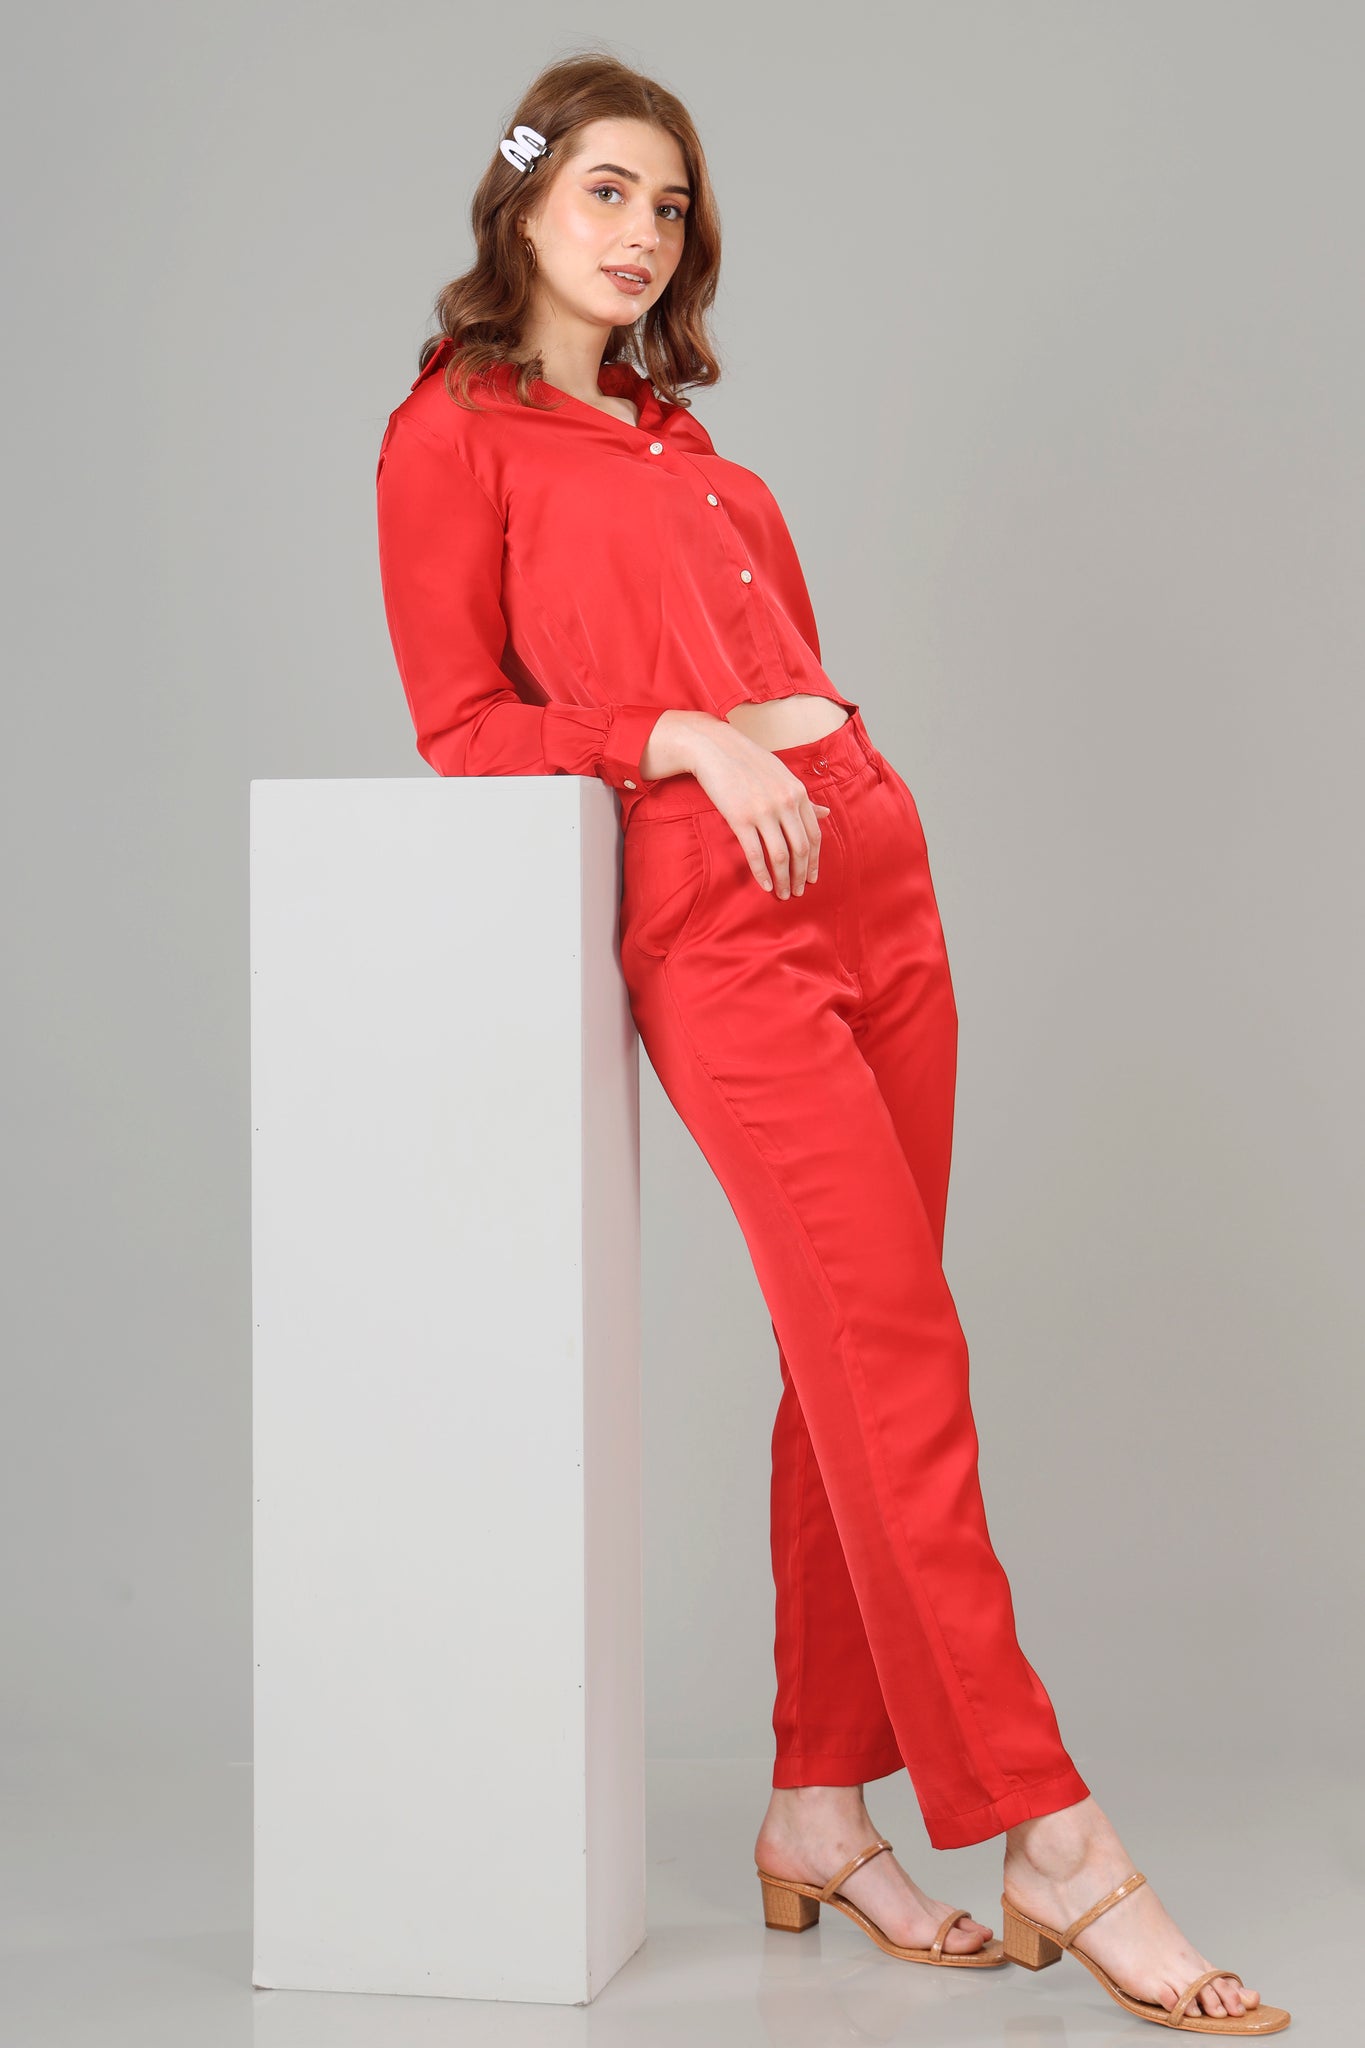 Romantic Red Cropped Shirt Co-Ord Set For Women